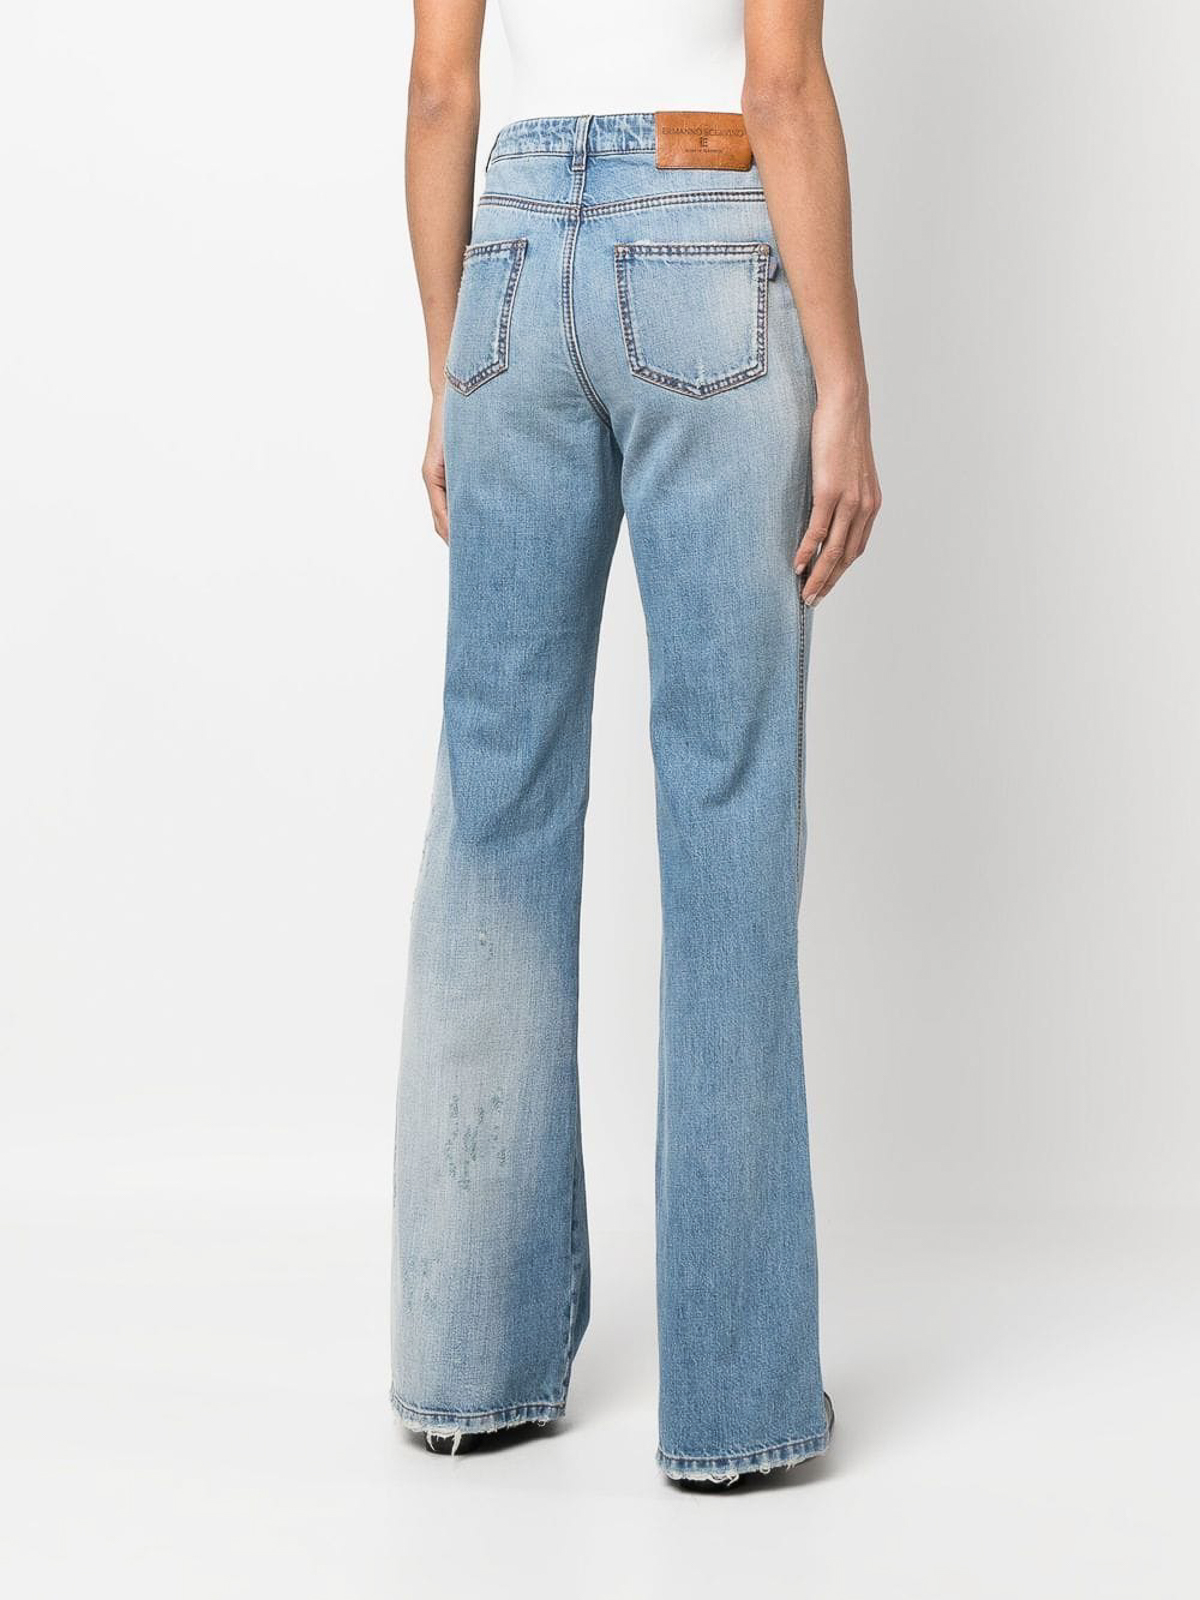 Shop Ermanno Scervino Flared Faded Jeans With Ripped Details In Light Wash